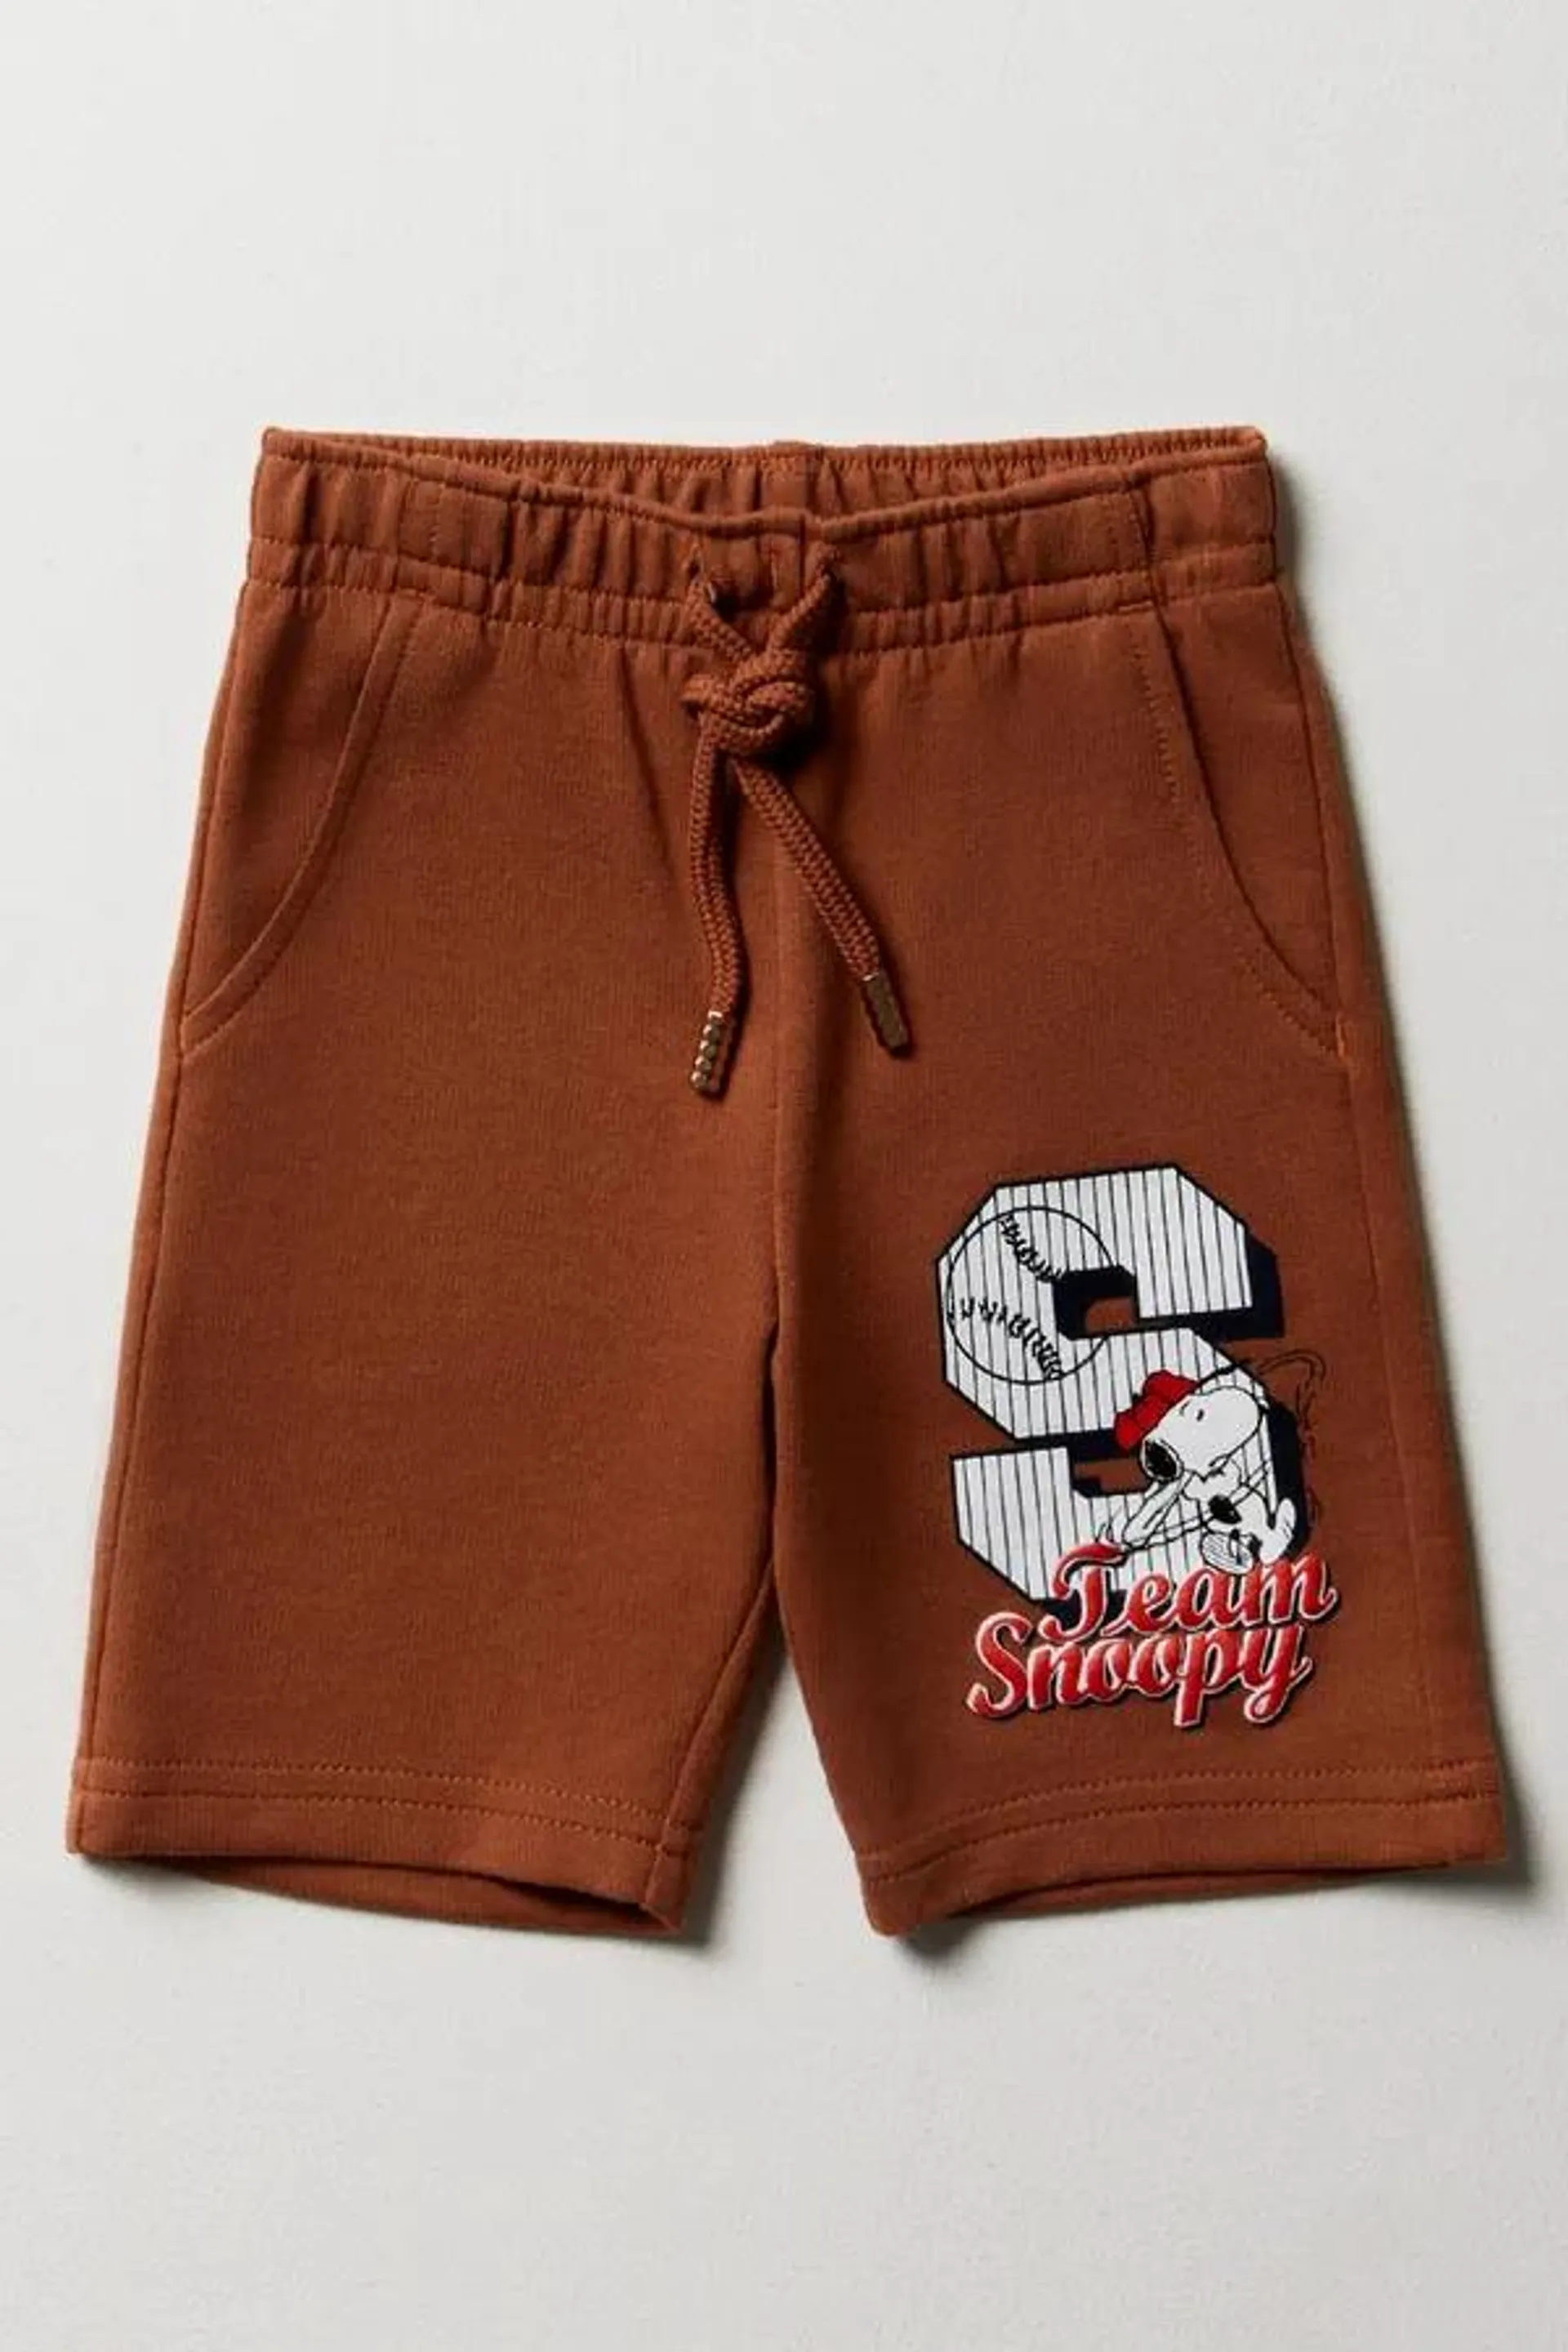 Snoopy shorts brown